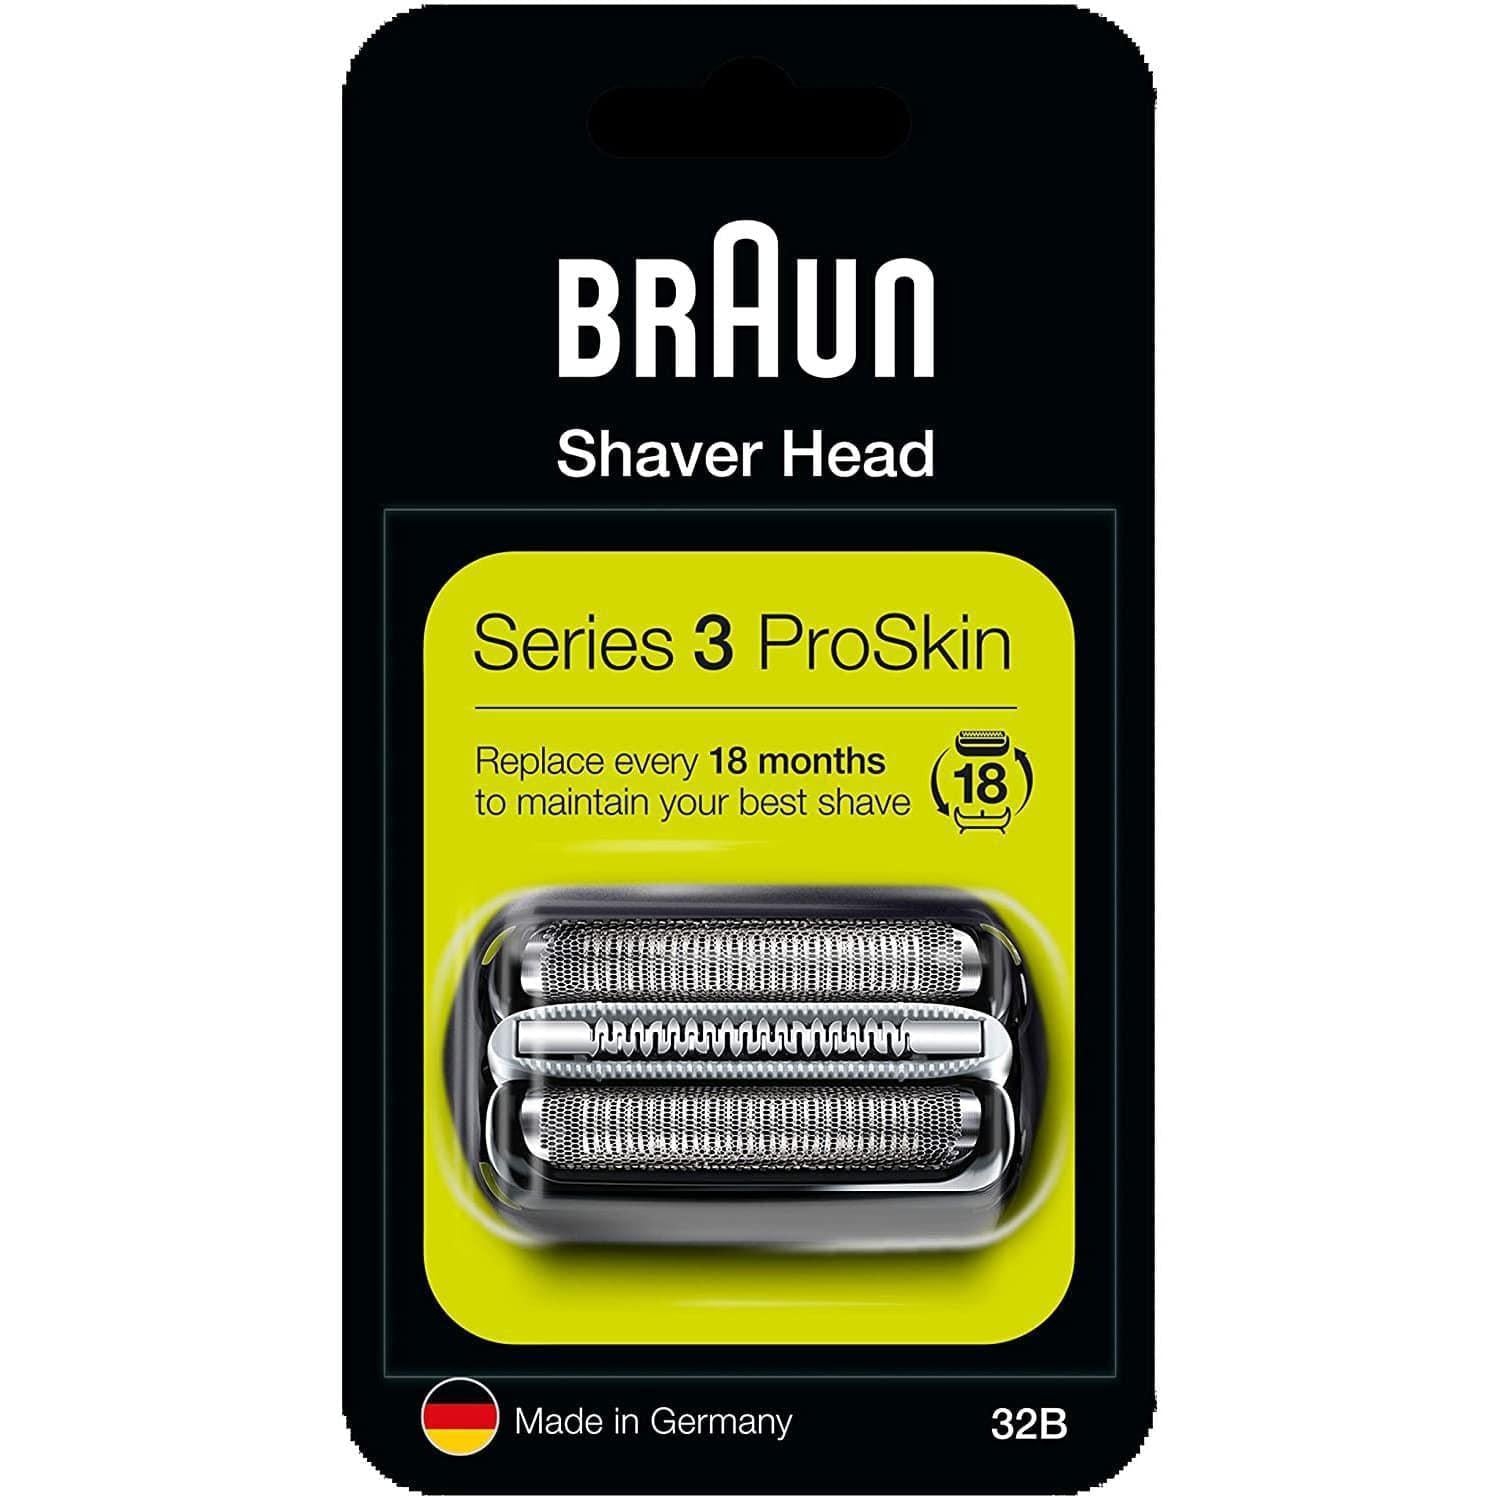 GENUINE BRAUN 30B Replacement Foil & Cutter NEW (7000/4000 Series) AS  PICTURED